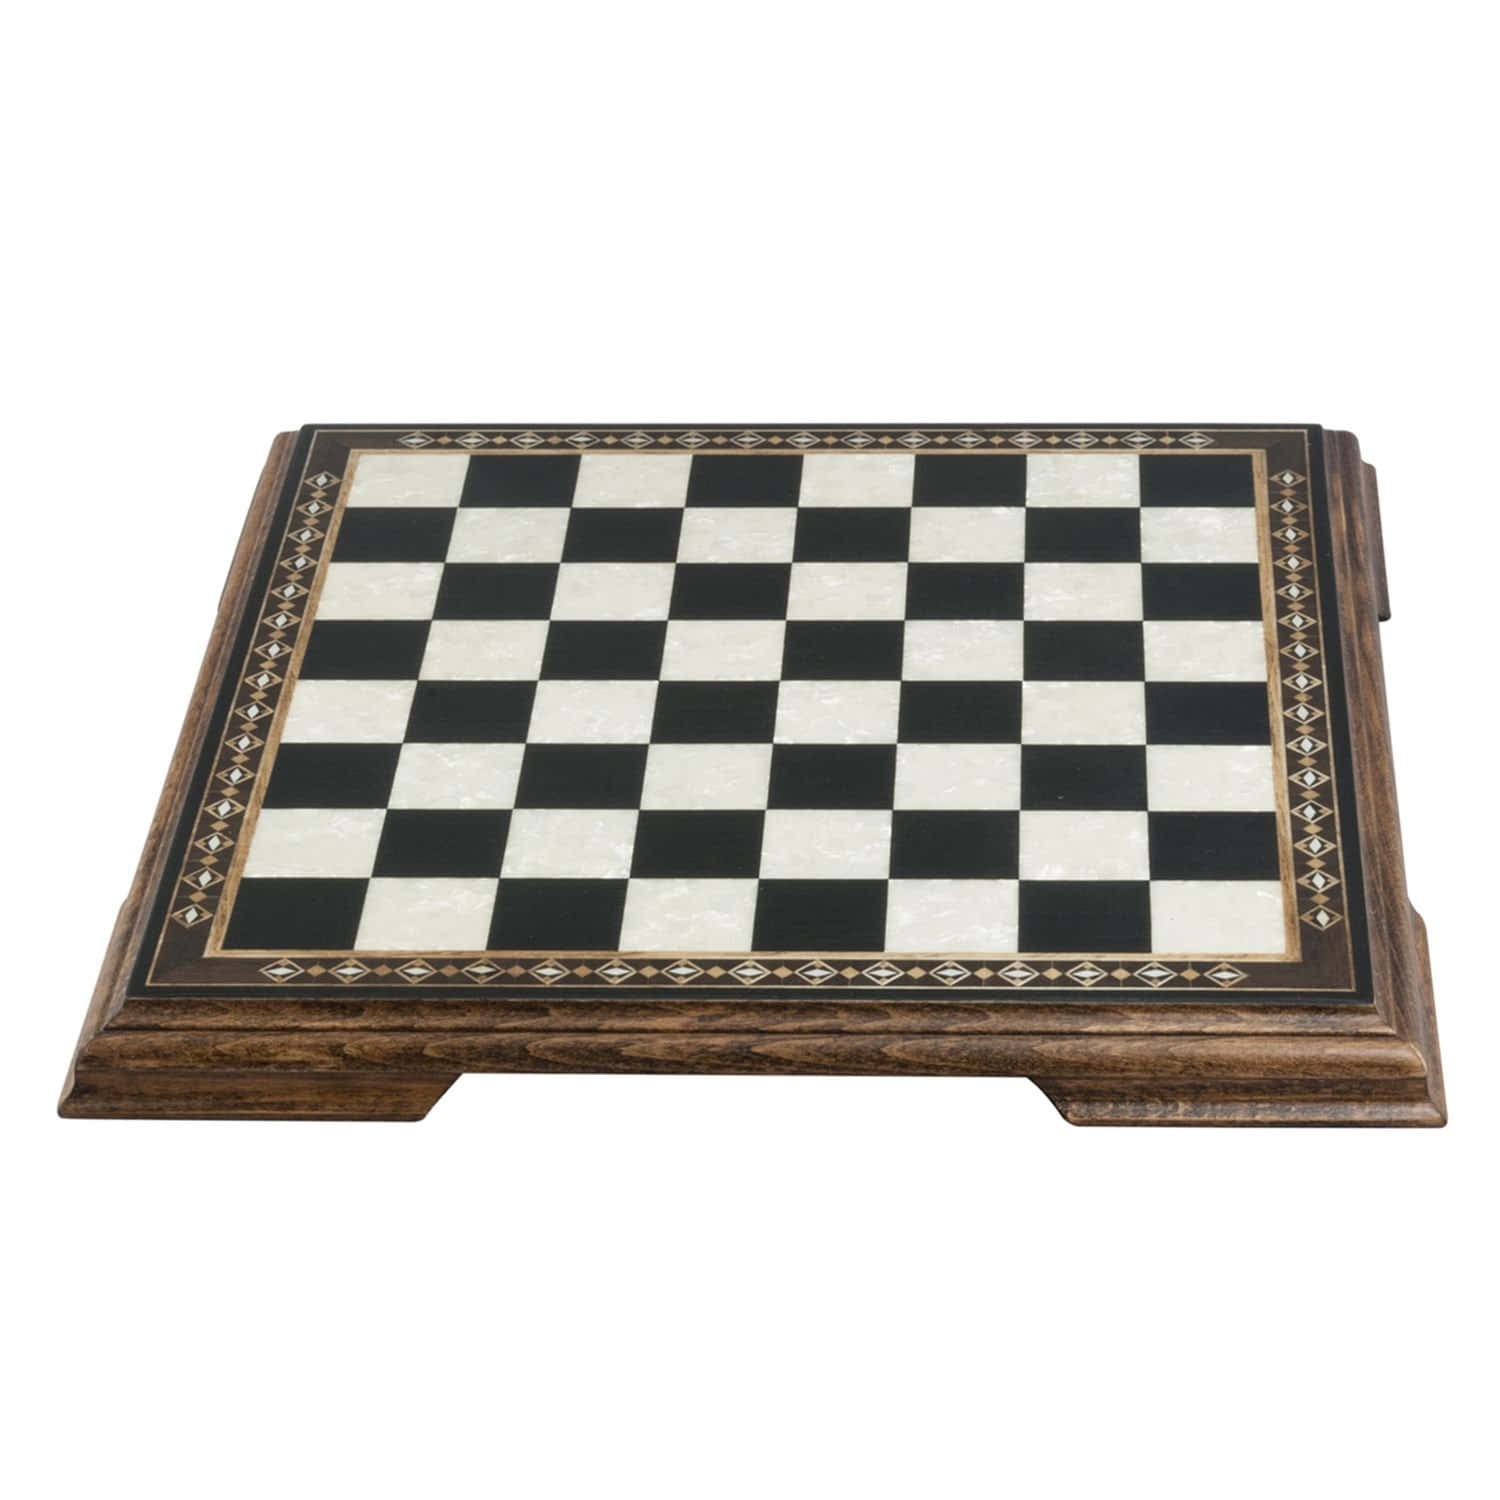 A Classic Game Of Chess Is Played On A Traditional Wooden Chessboard.